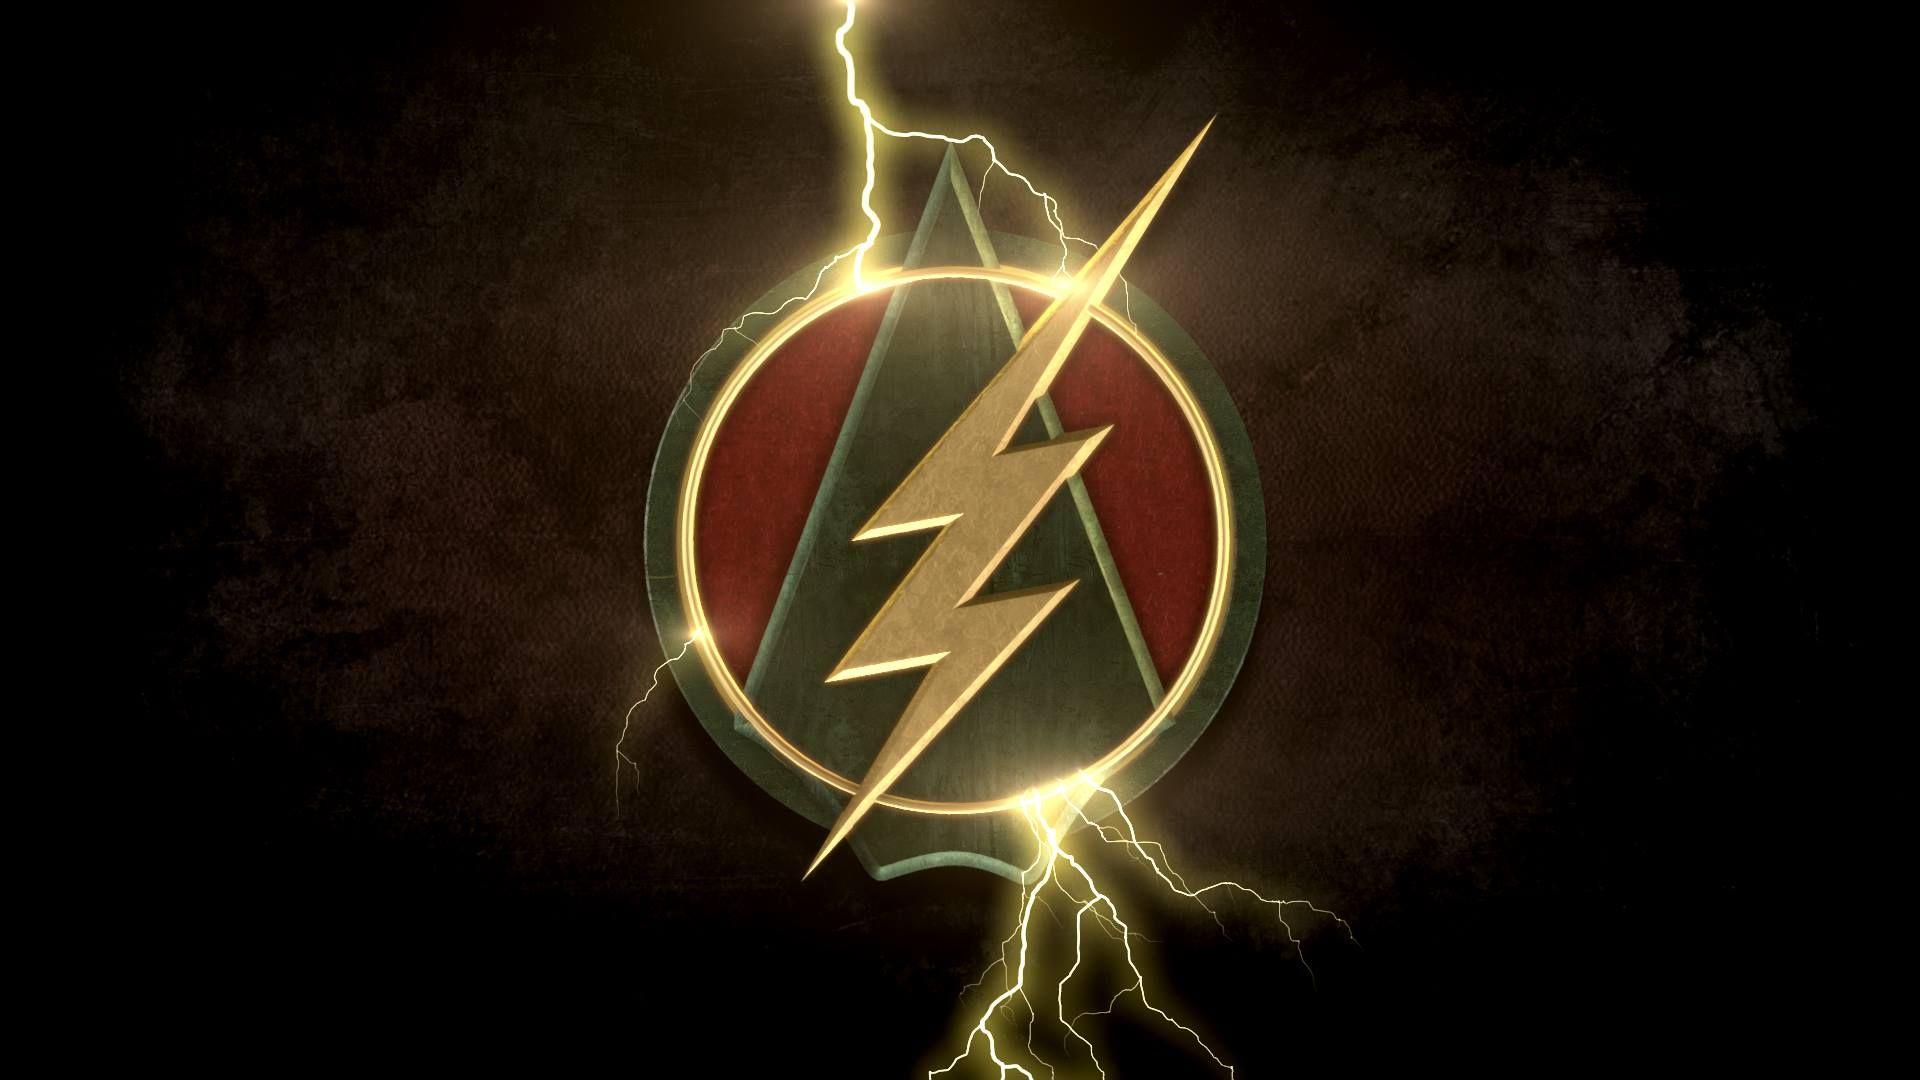 The Flash And Arrow Logo. Flash wallpaper, Zoom the flash